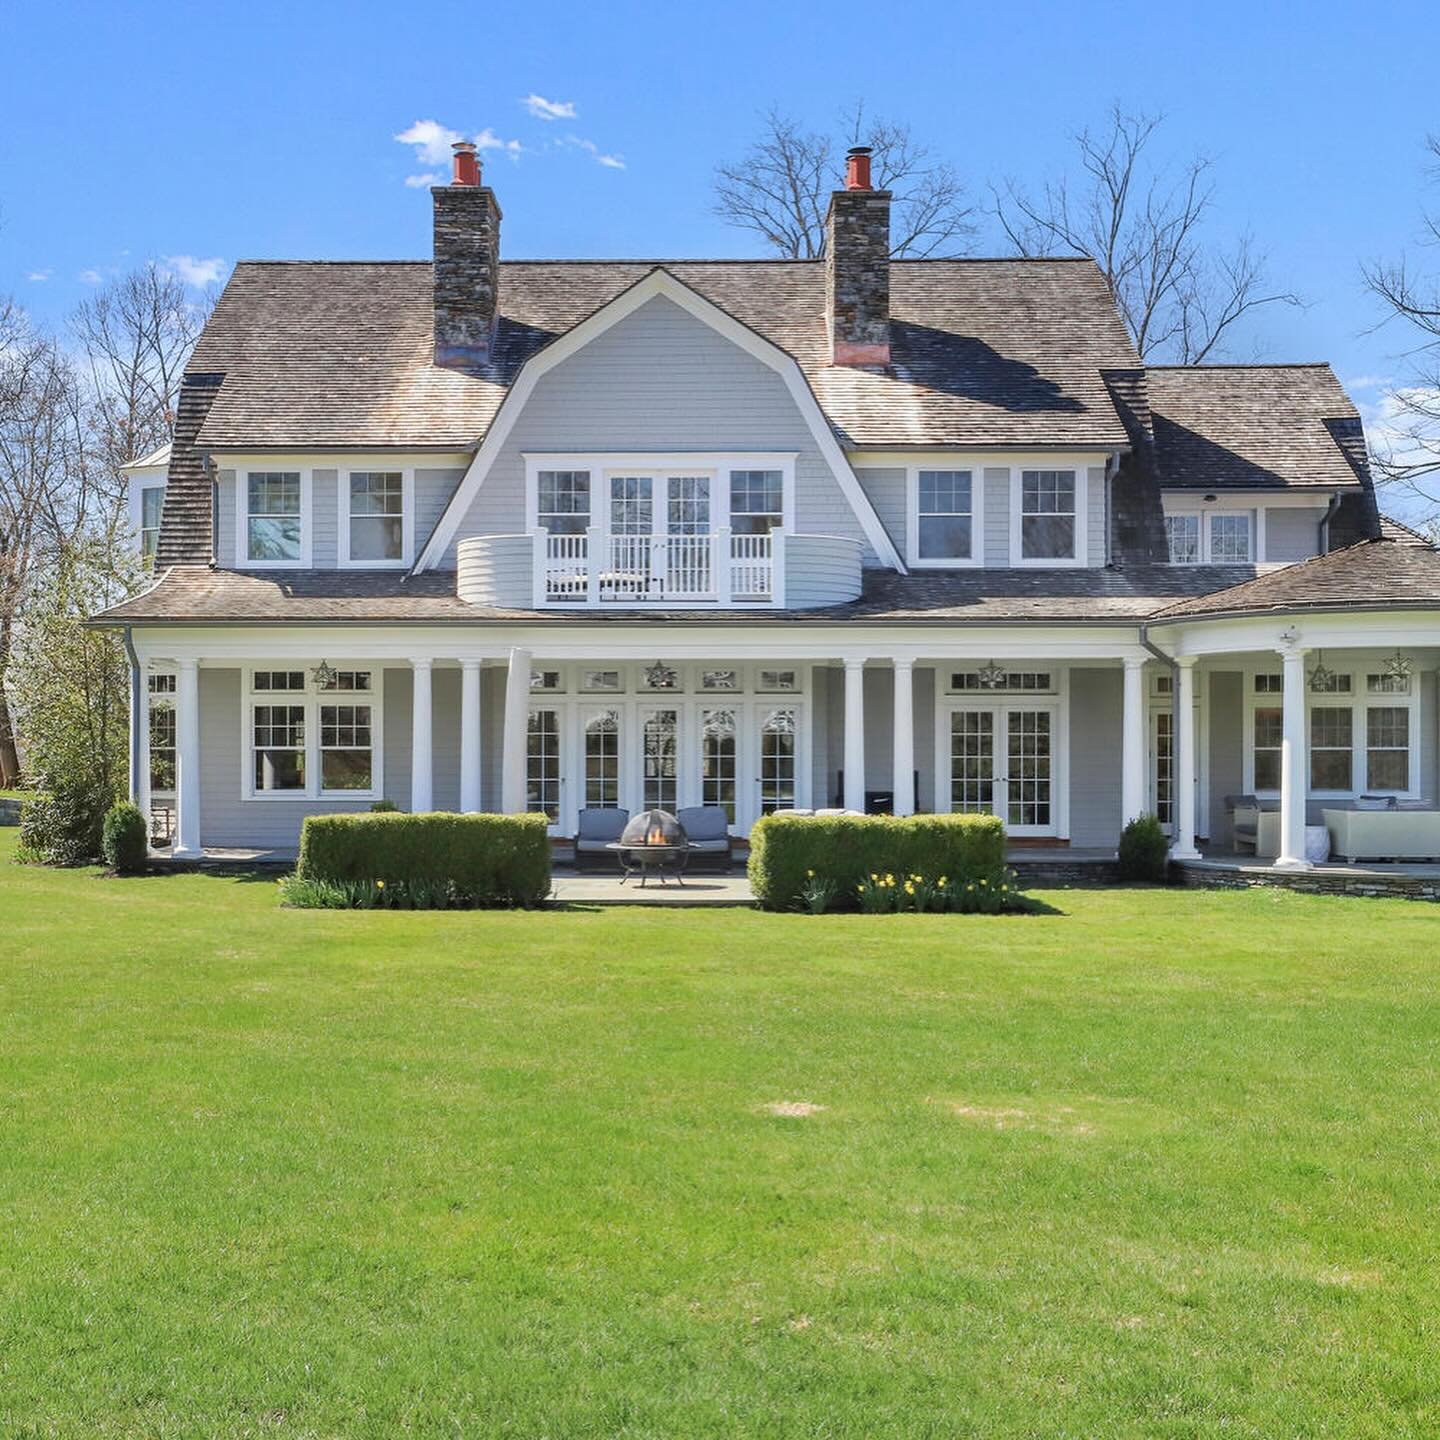 M&eacute;tier Maison Monday | Featuring Greenwich, CT

A rare opportunity to experience coastal living in Greenwich&rsquo;s most coveted neighborhood - The Belle Haven Association. This beautiful six bedroom home spans approximately 8,847 square feet